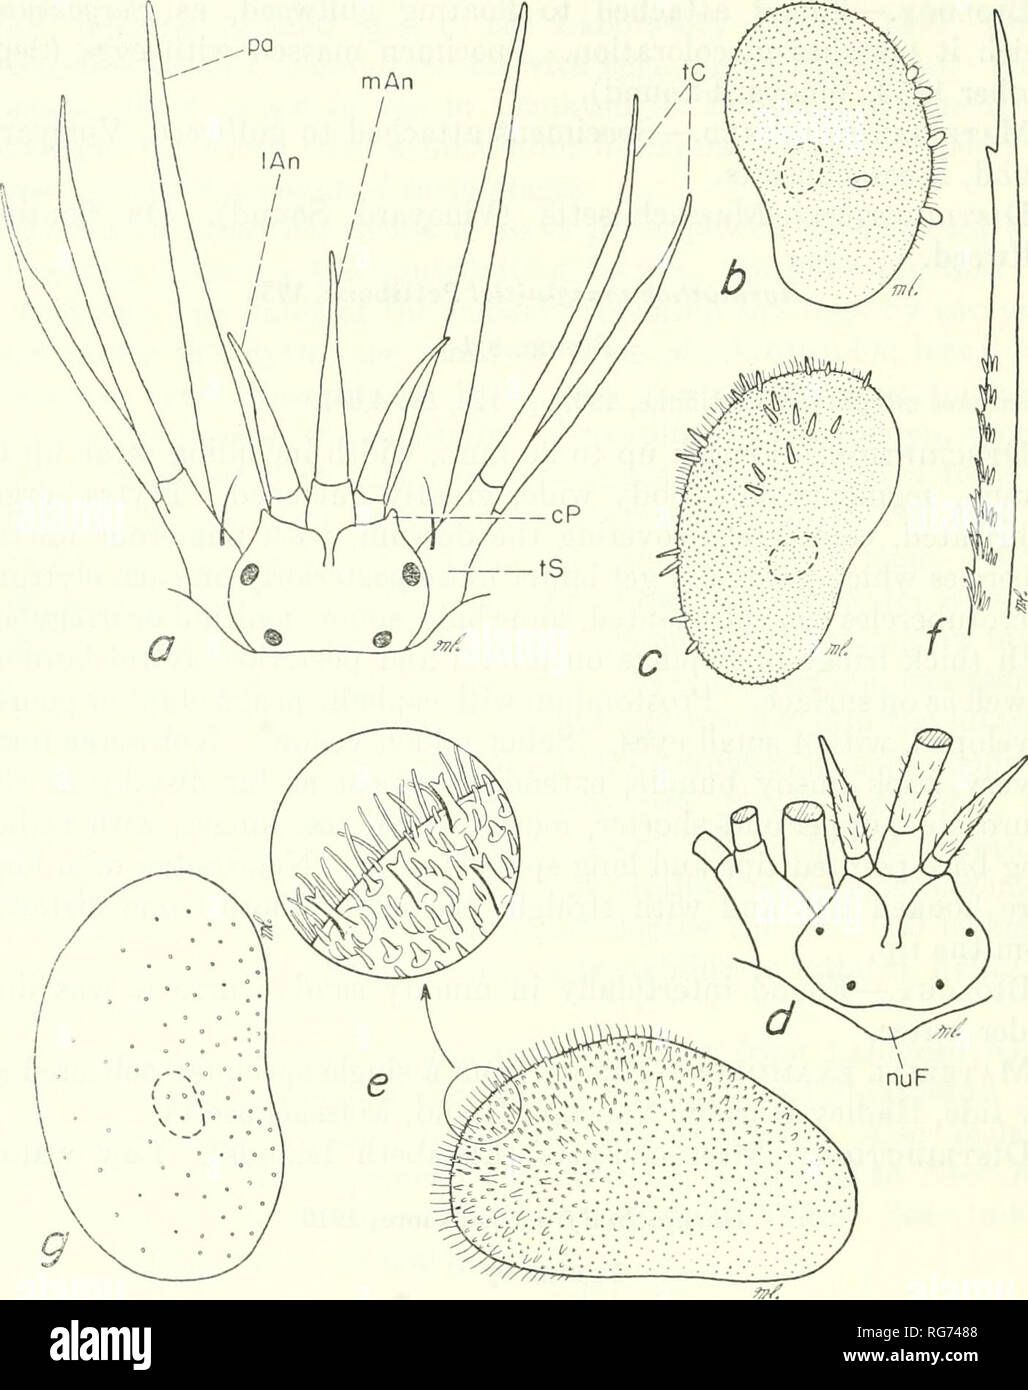 . Bulletin - United States National Museum. Science. 40 U.S. NATIONAL MUSEUM BULLETIN 227. Figure 8.—Polynoidae, a-c, Harmothoe extenuata: a, dorsal view prostomium and tentacular segment; h, elytron of var. fropinqua; c, elytron of var. rarispina. d-f, Har7nothoe mac- ginitiei: d, prostomium; e, elytron;/, tip of neuroseta. g, Harmothoe dearborni, elytron. Body darkl}^^ pigmented dorsally, with wide transverse, somewhat interrupted brown bands. Elytra with mottled brownish coloration. Eiytral microtubercles conical, hooked; soft macro tubercles near ex- ternal border, not sharply set off from Stock Photo